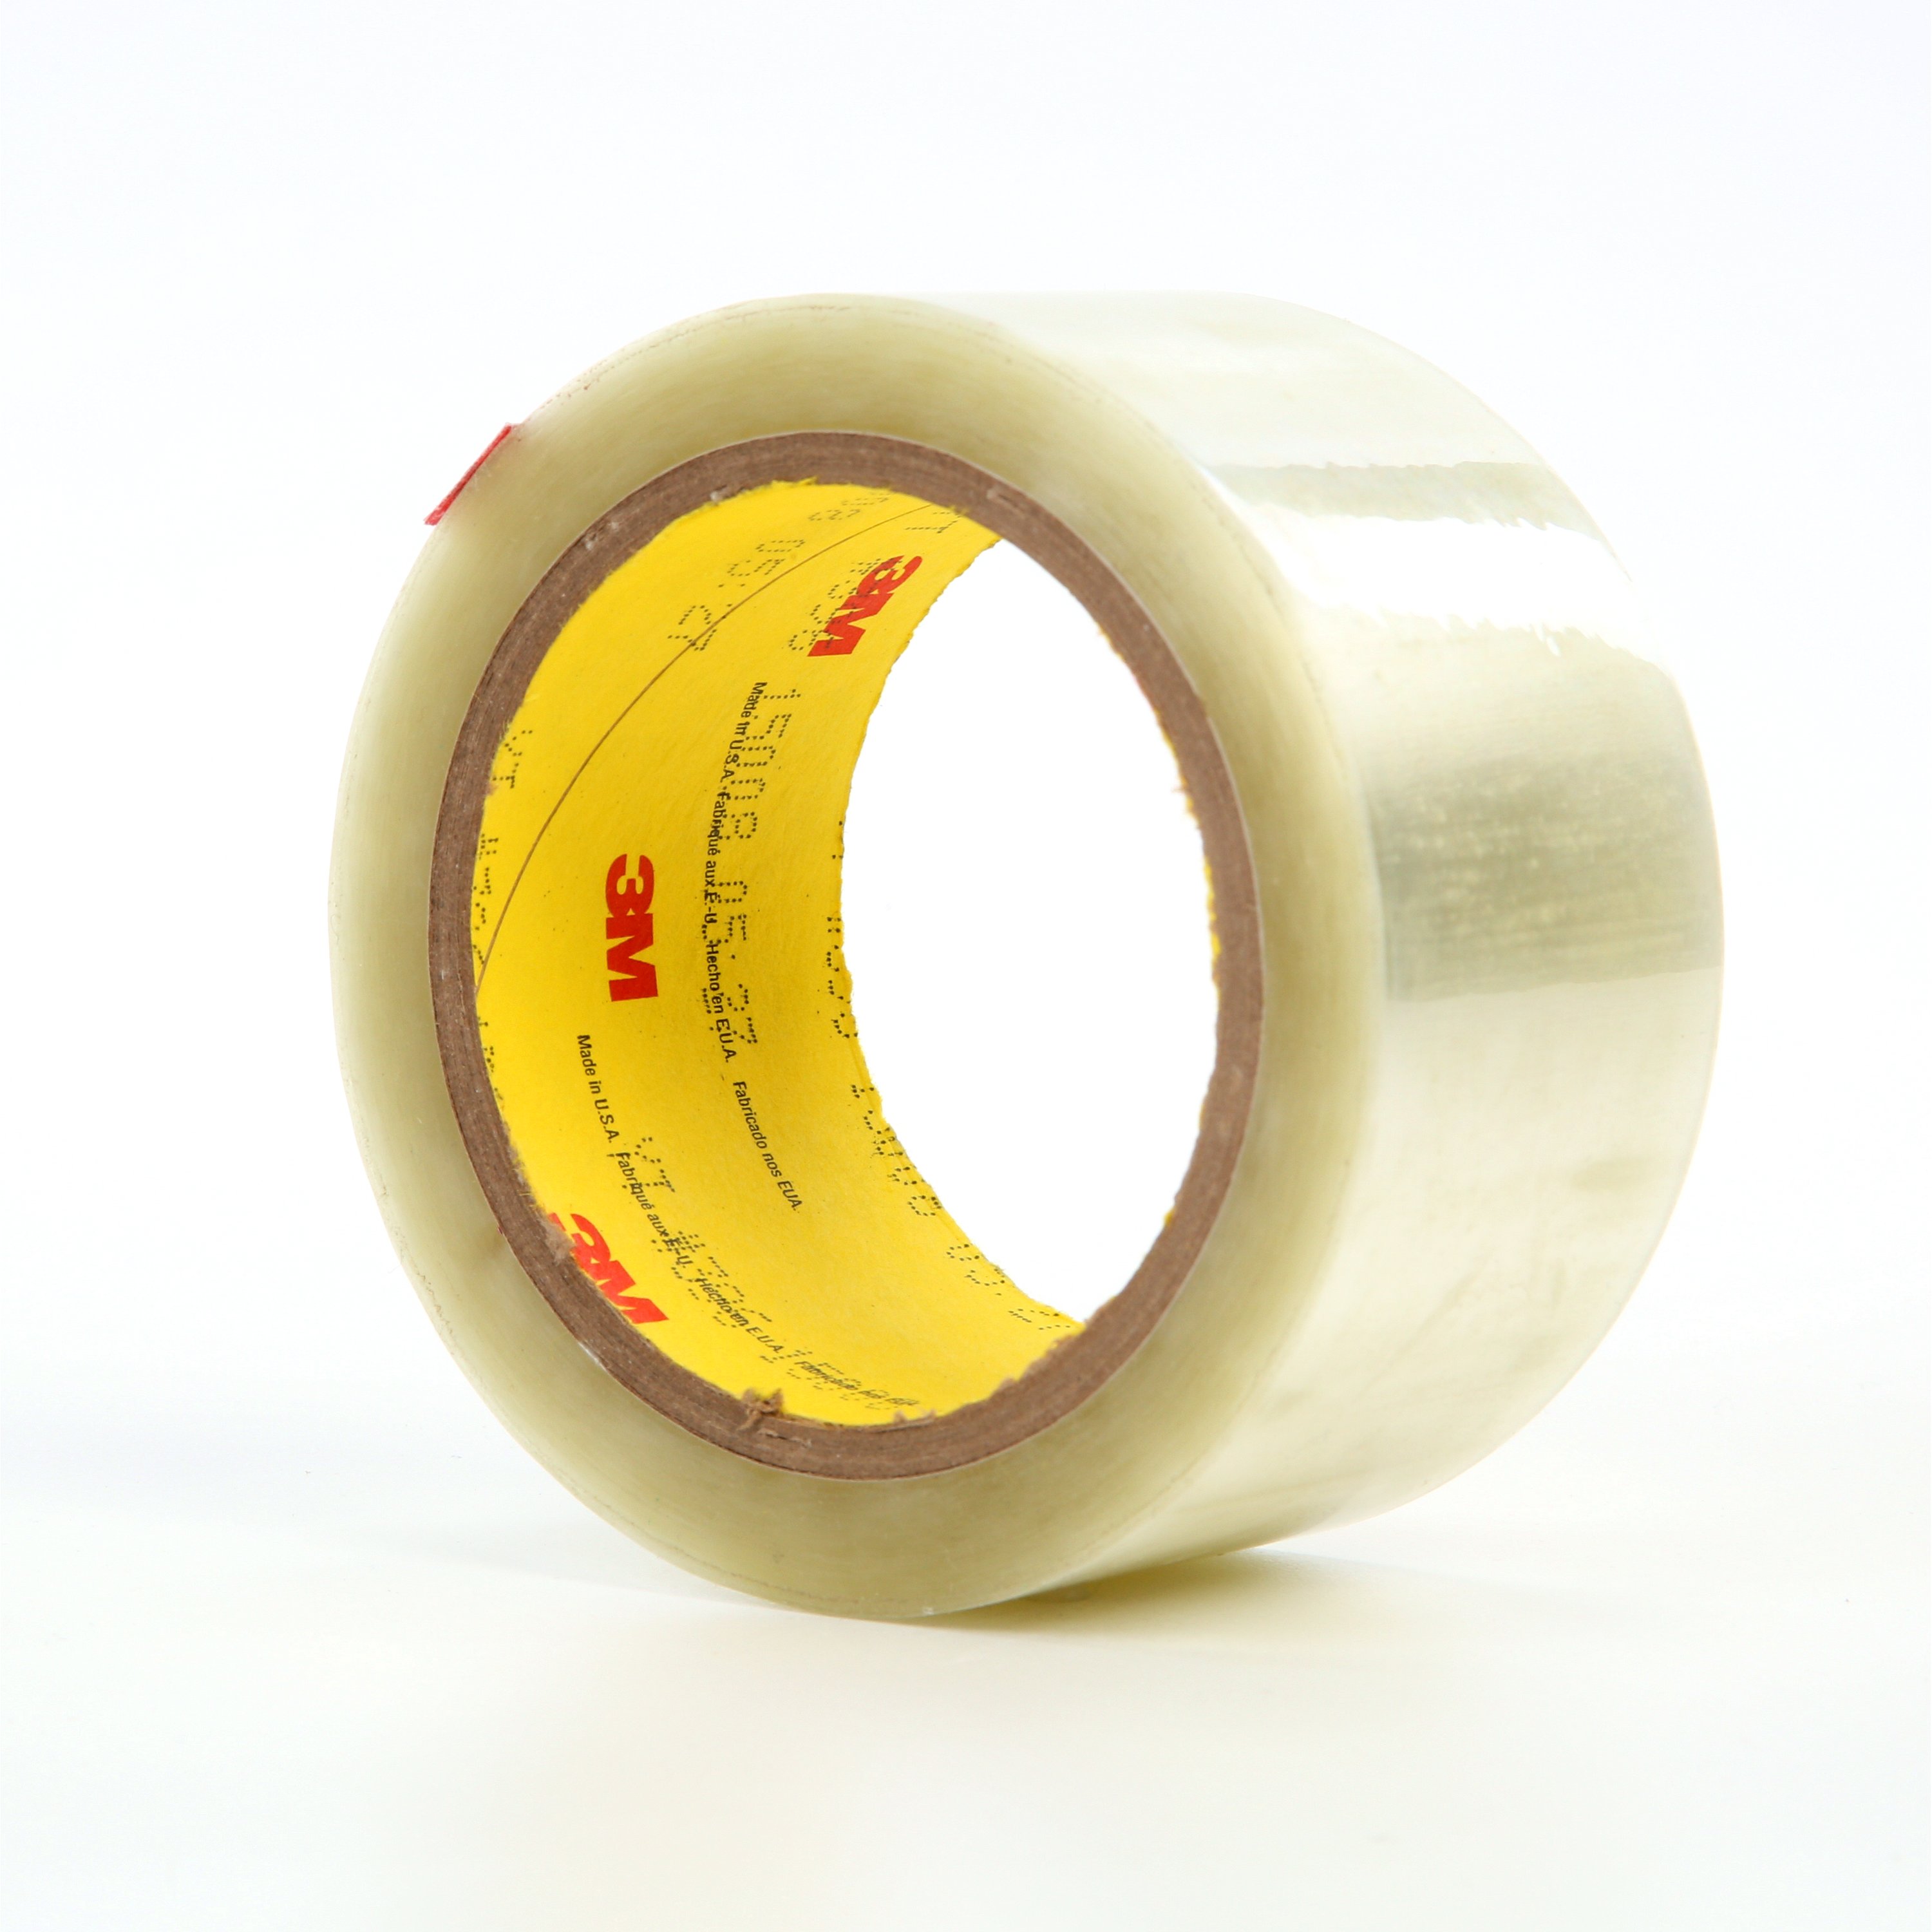 The thin caliper and tensile strength of the transparent polyester backing, combined with the quick adhesion and holding power of the rubber resin adhesive, make 3M™ Super Bond Film Tape 396  work well on a wide variety of applications.